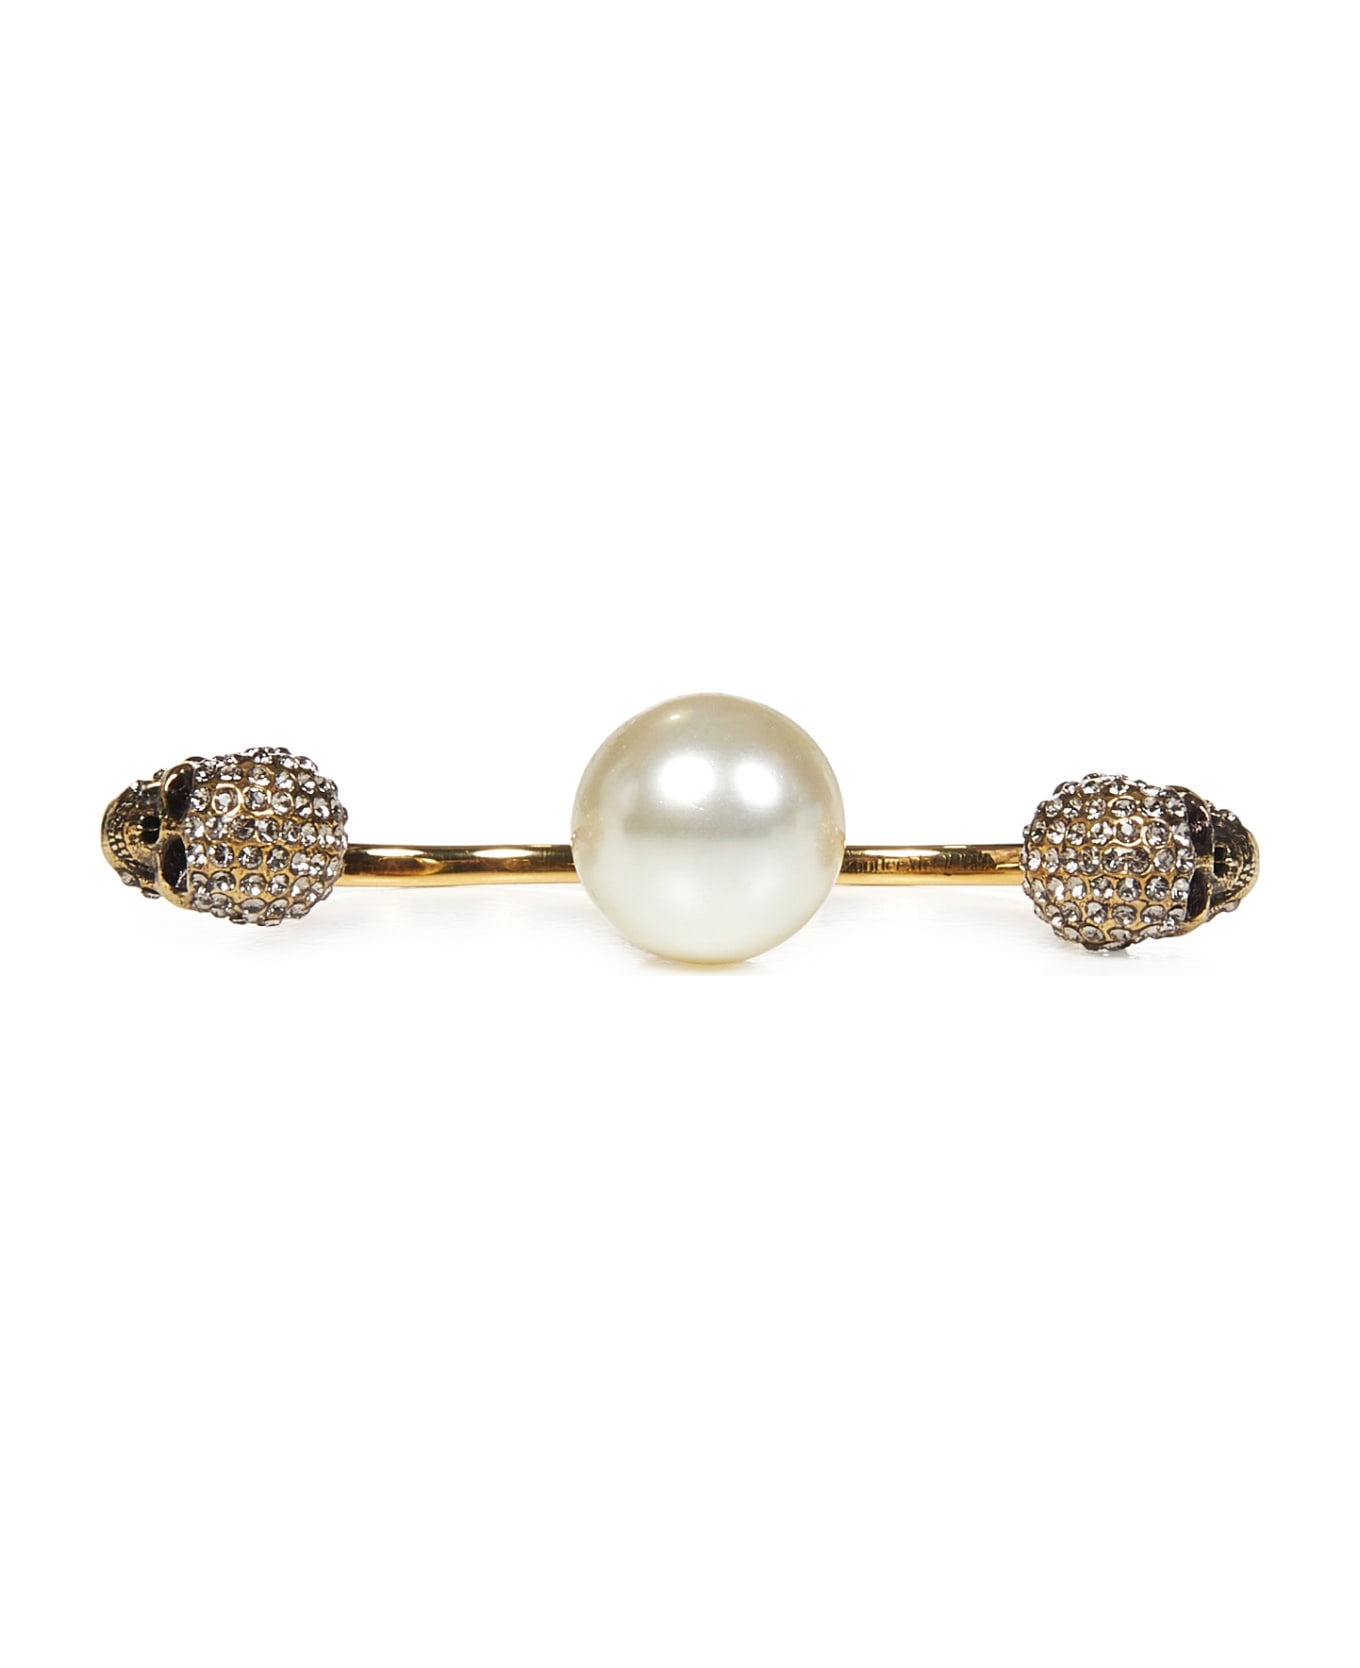 Alexander McQueen Antiqued Gold Double Pearl Skull Ring - Oro リング